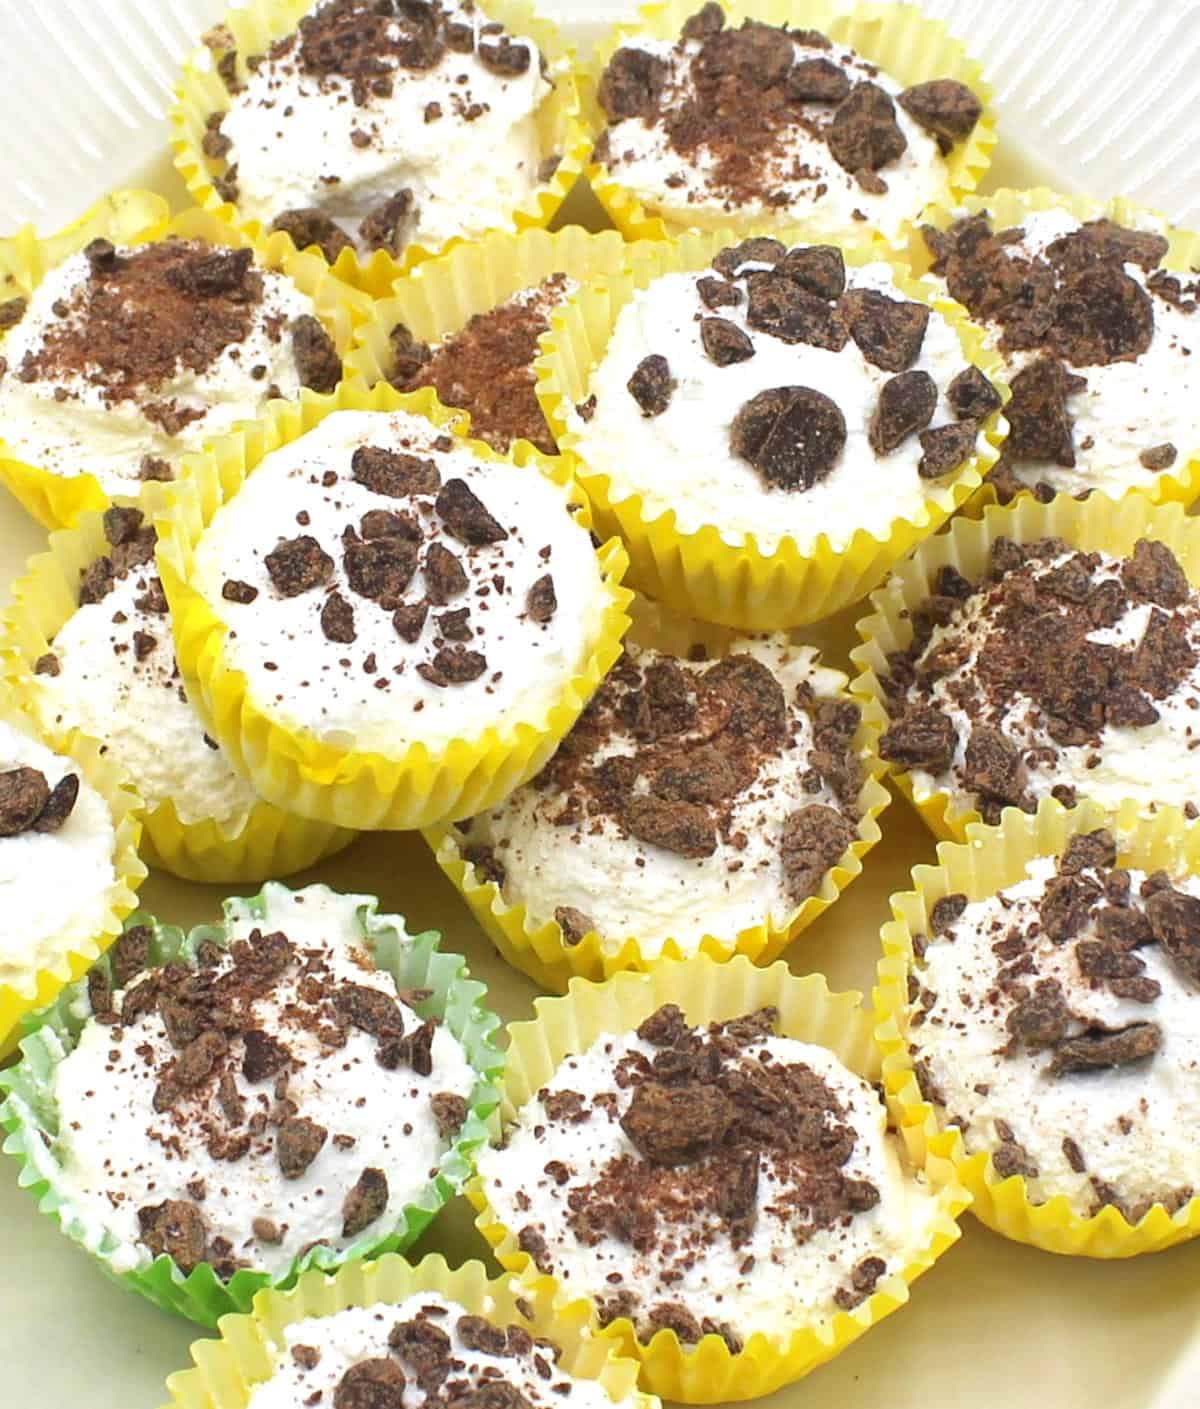 Vegan mini cheesecake bites with chocolate pieces in yellow cupcake liners.